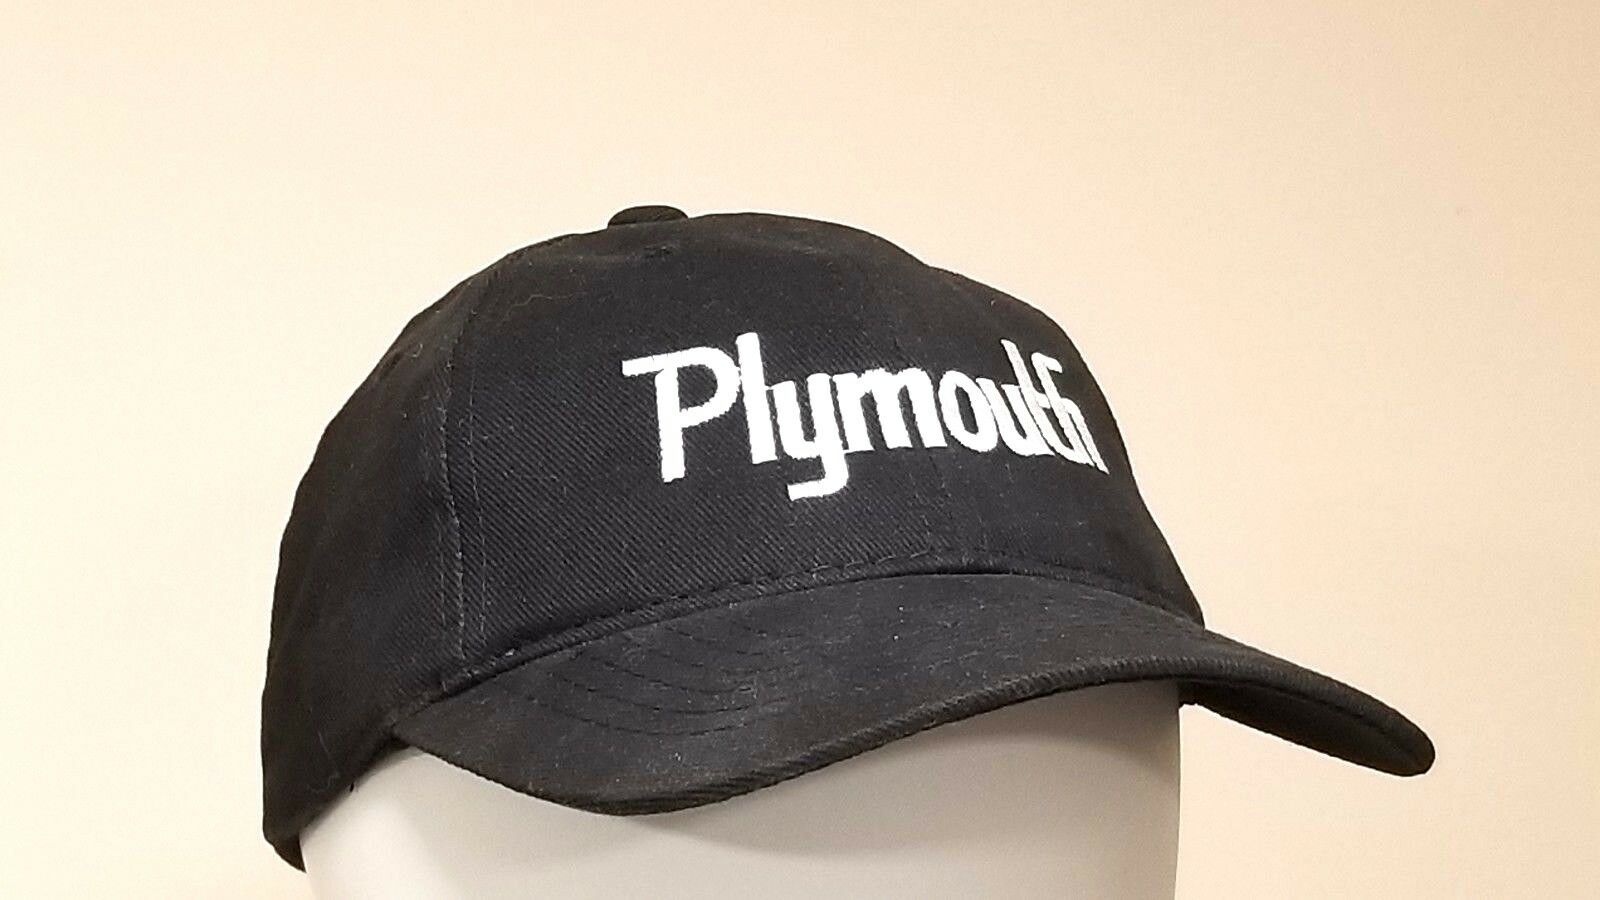 Plymouth Embroidered Cap - Mopar/direct Connection/hemi/roadrunner/cuda/duster